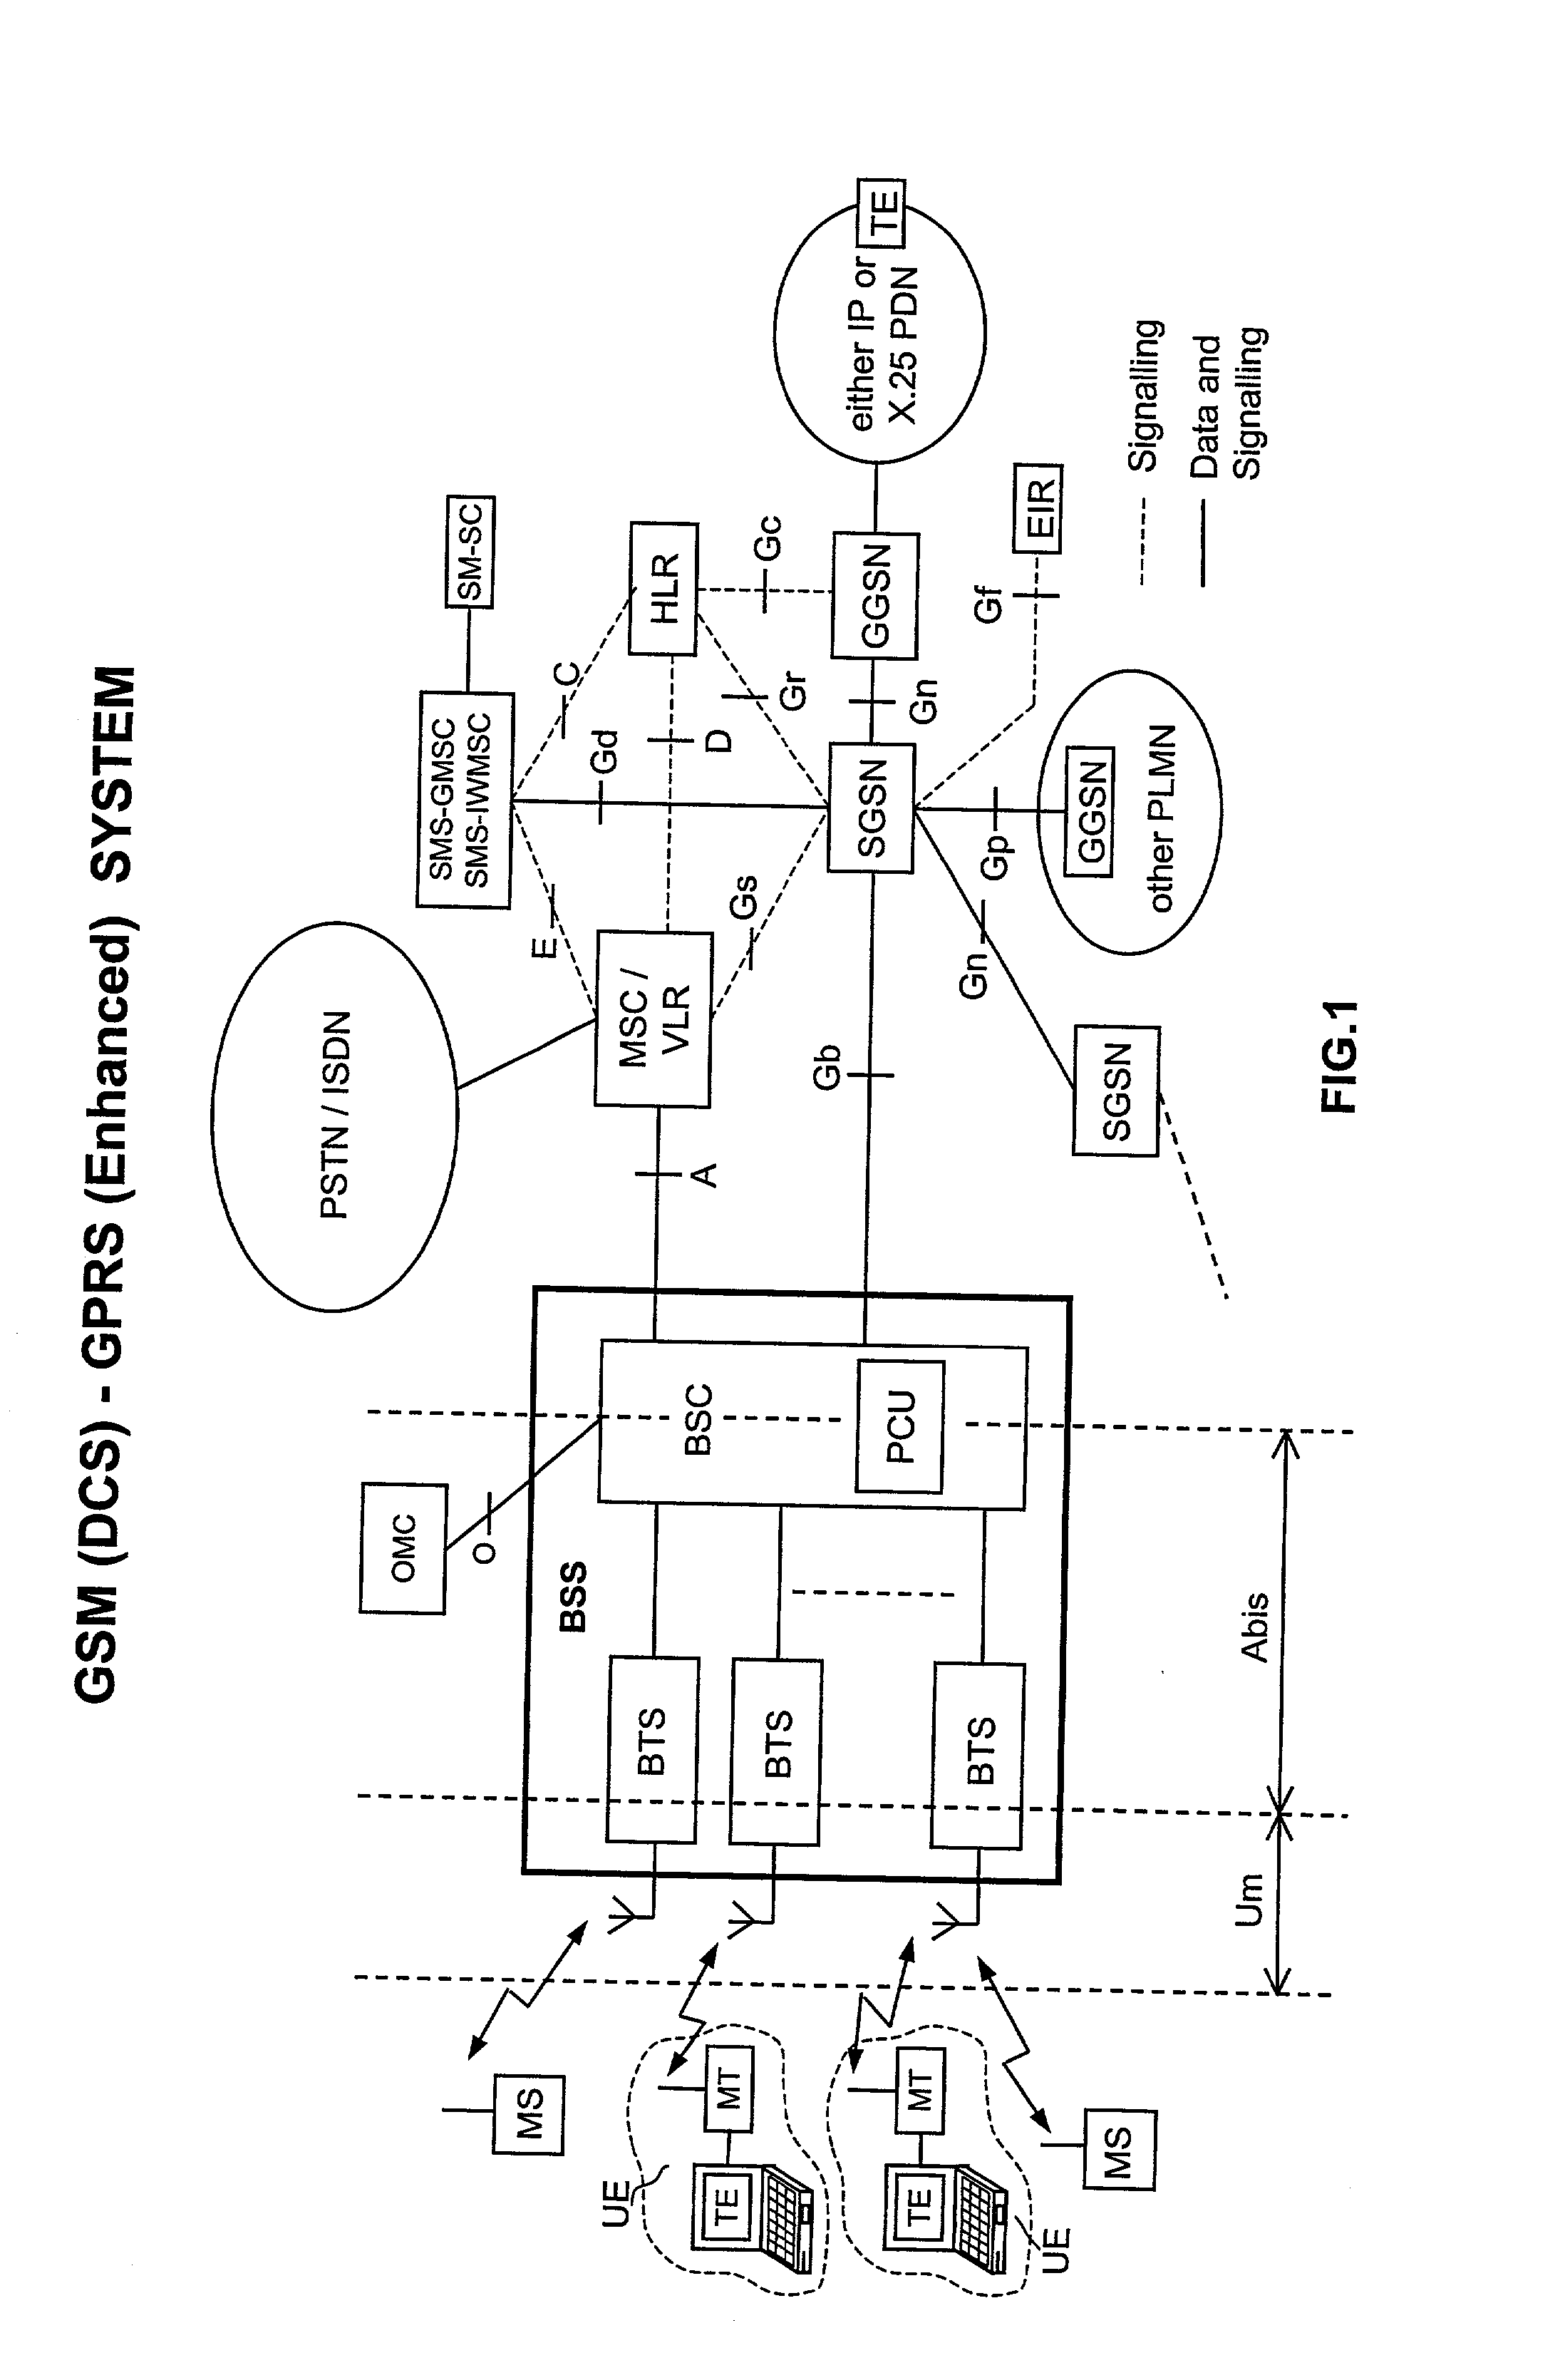 Method to perform downlink power control in packet switching cellular systems with dynamic allocation of the RF channel